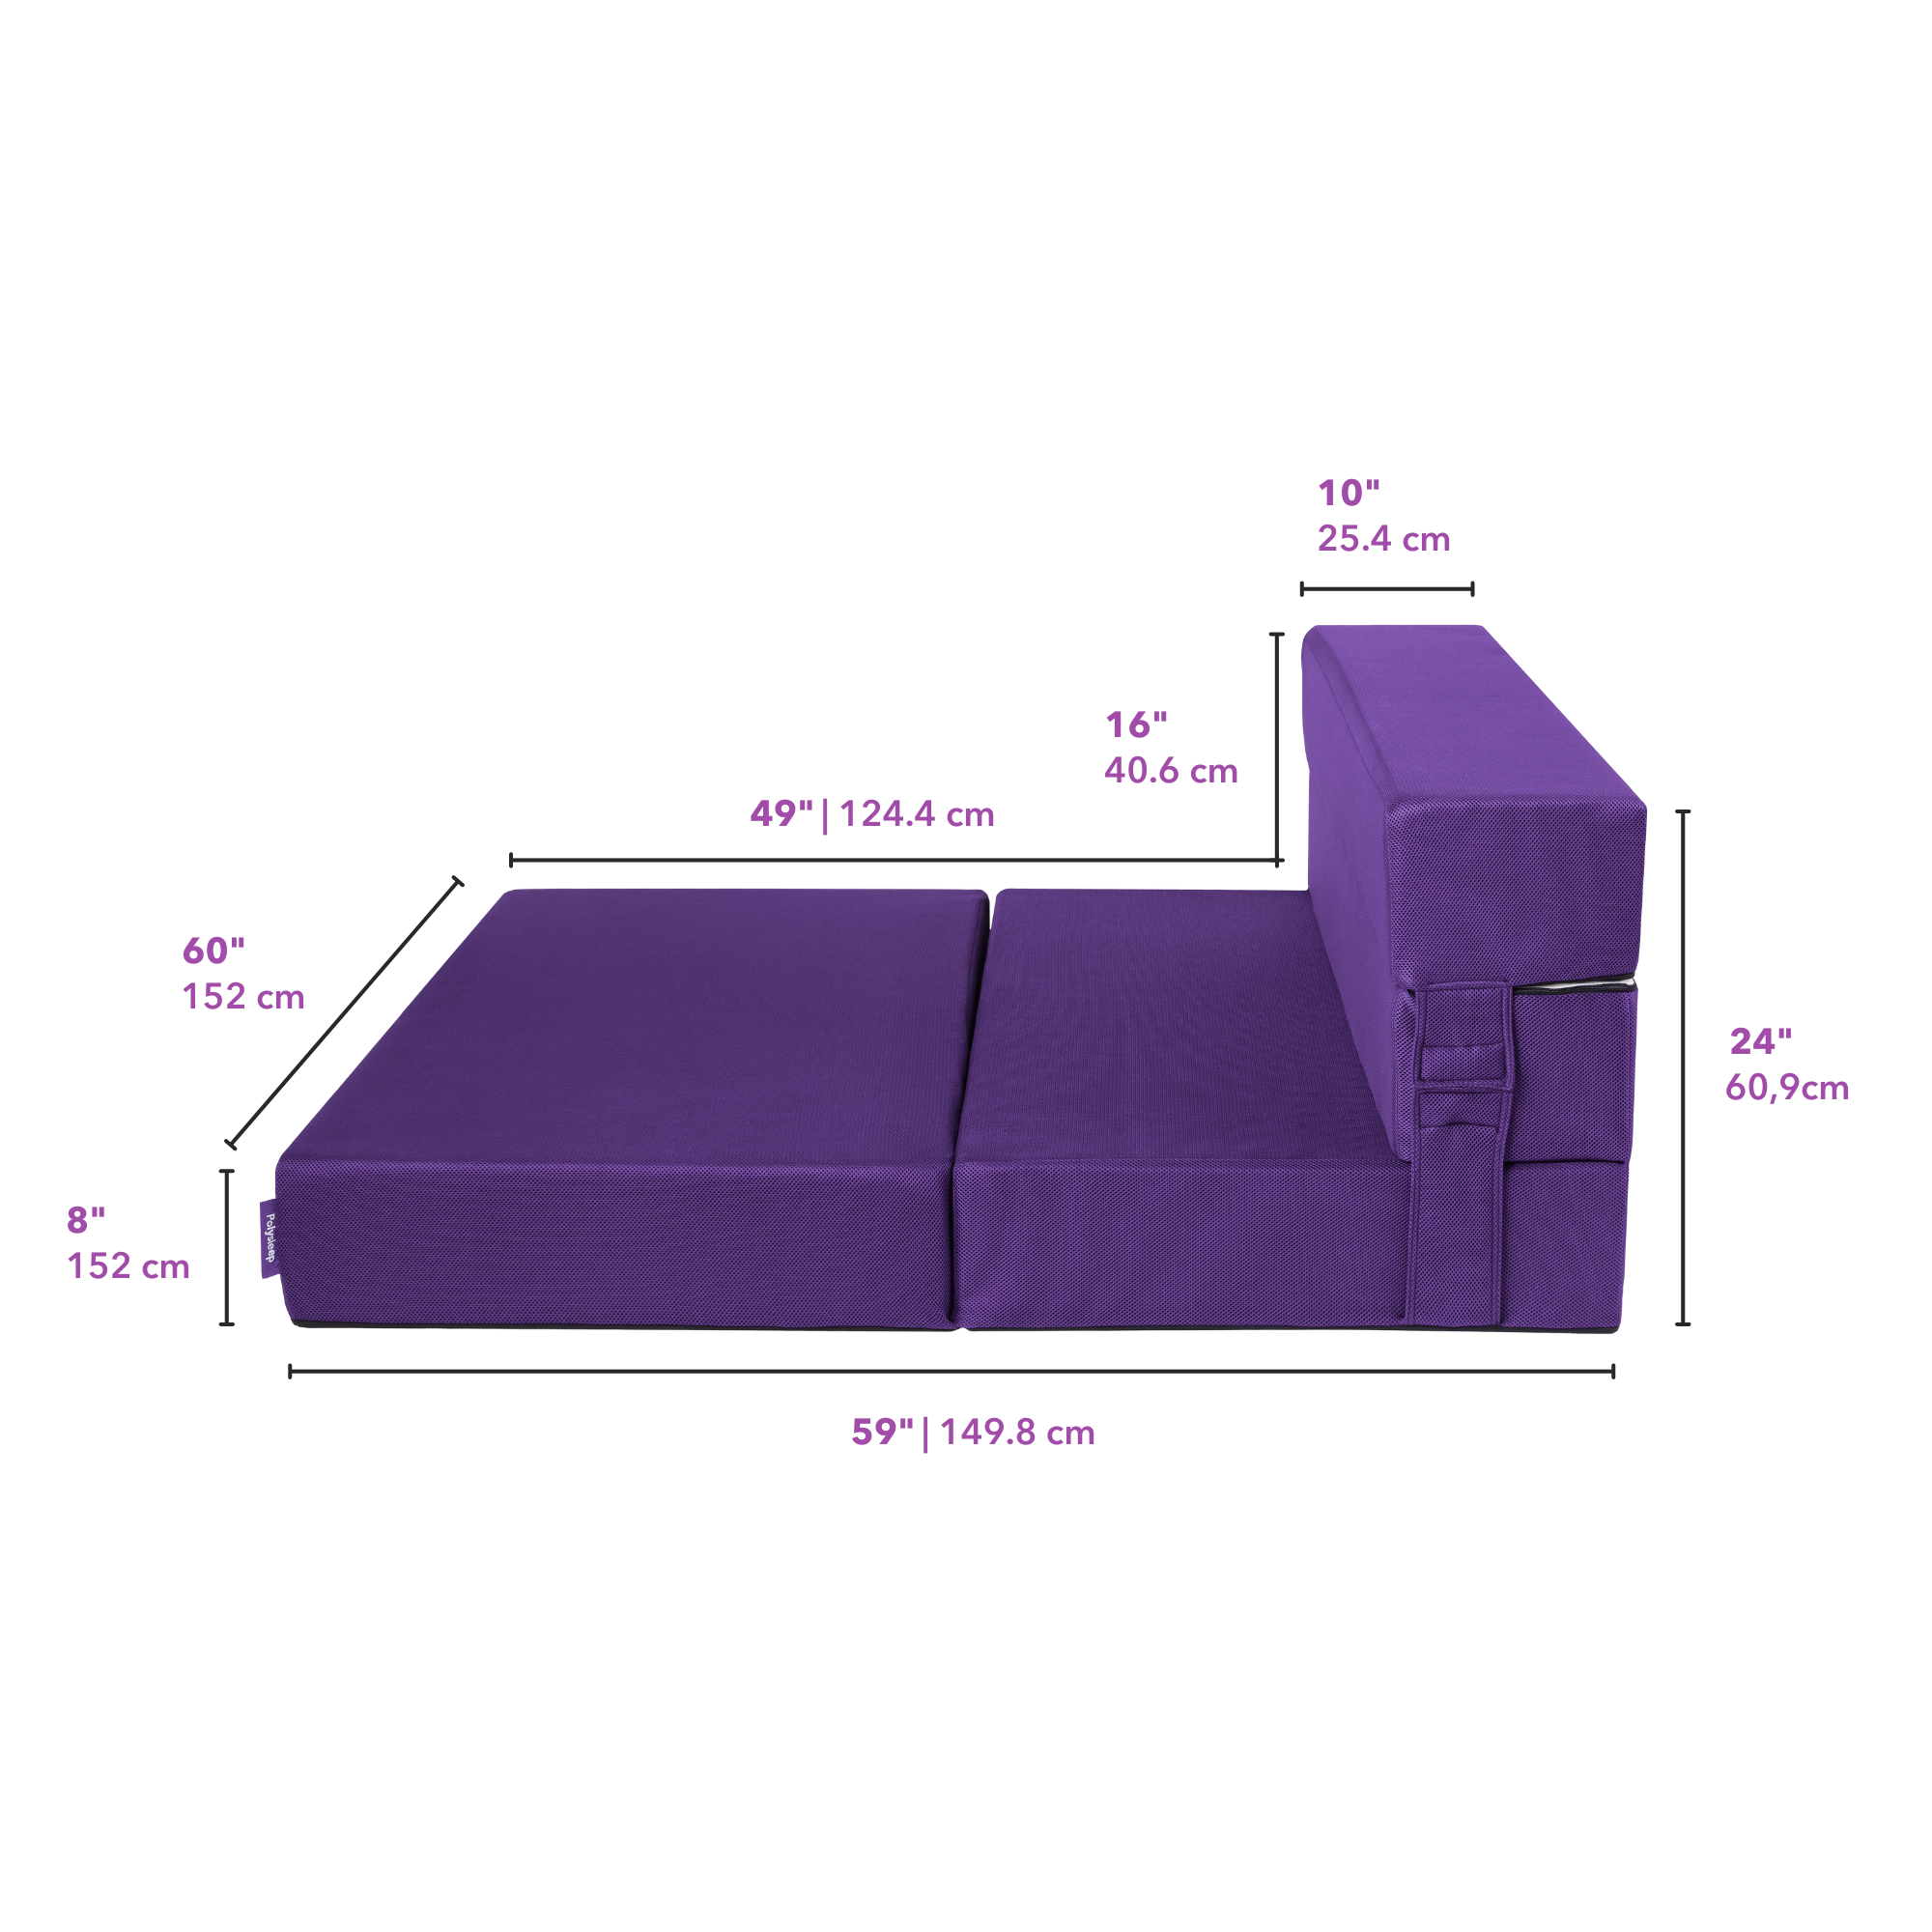 The Polycouch